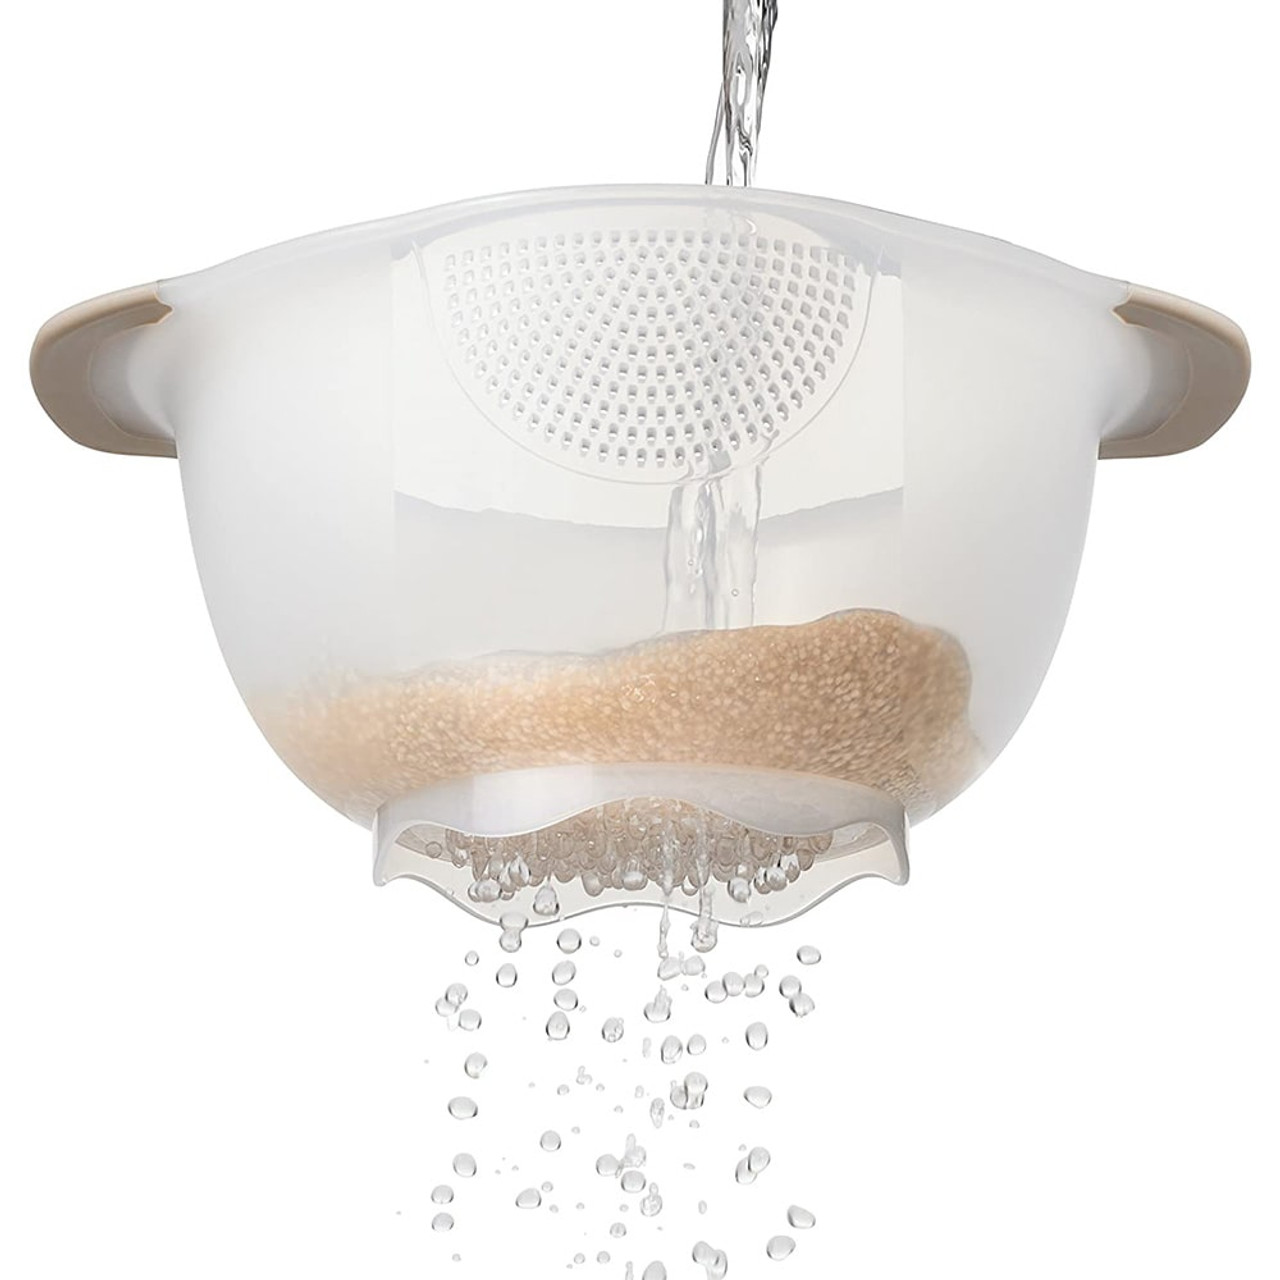 https://cdn11.bigcommerce.com/s-hccytny0od/images/stencil/1280x1280/products/4003/14672/oxo-good-grips-rice-grains-washing-colander-2__12633.1618141860.jpg?c=2?imbypass=on